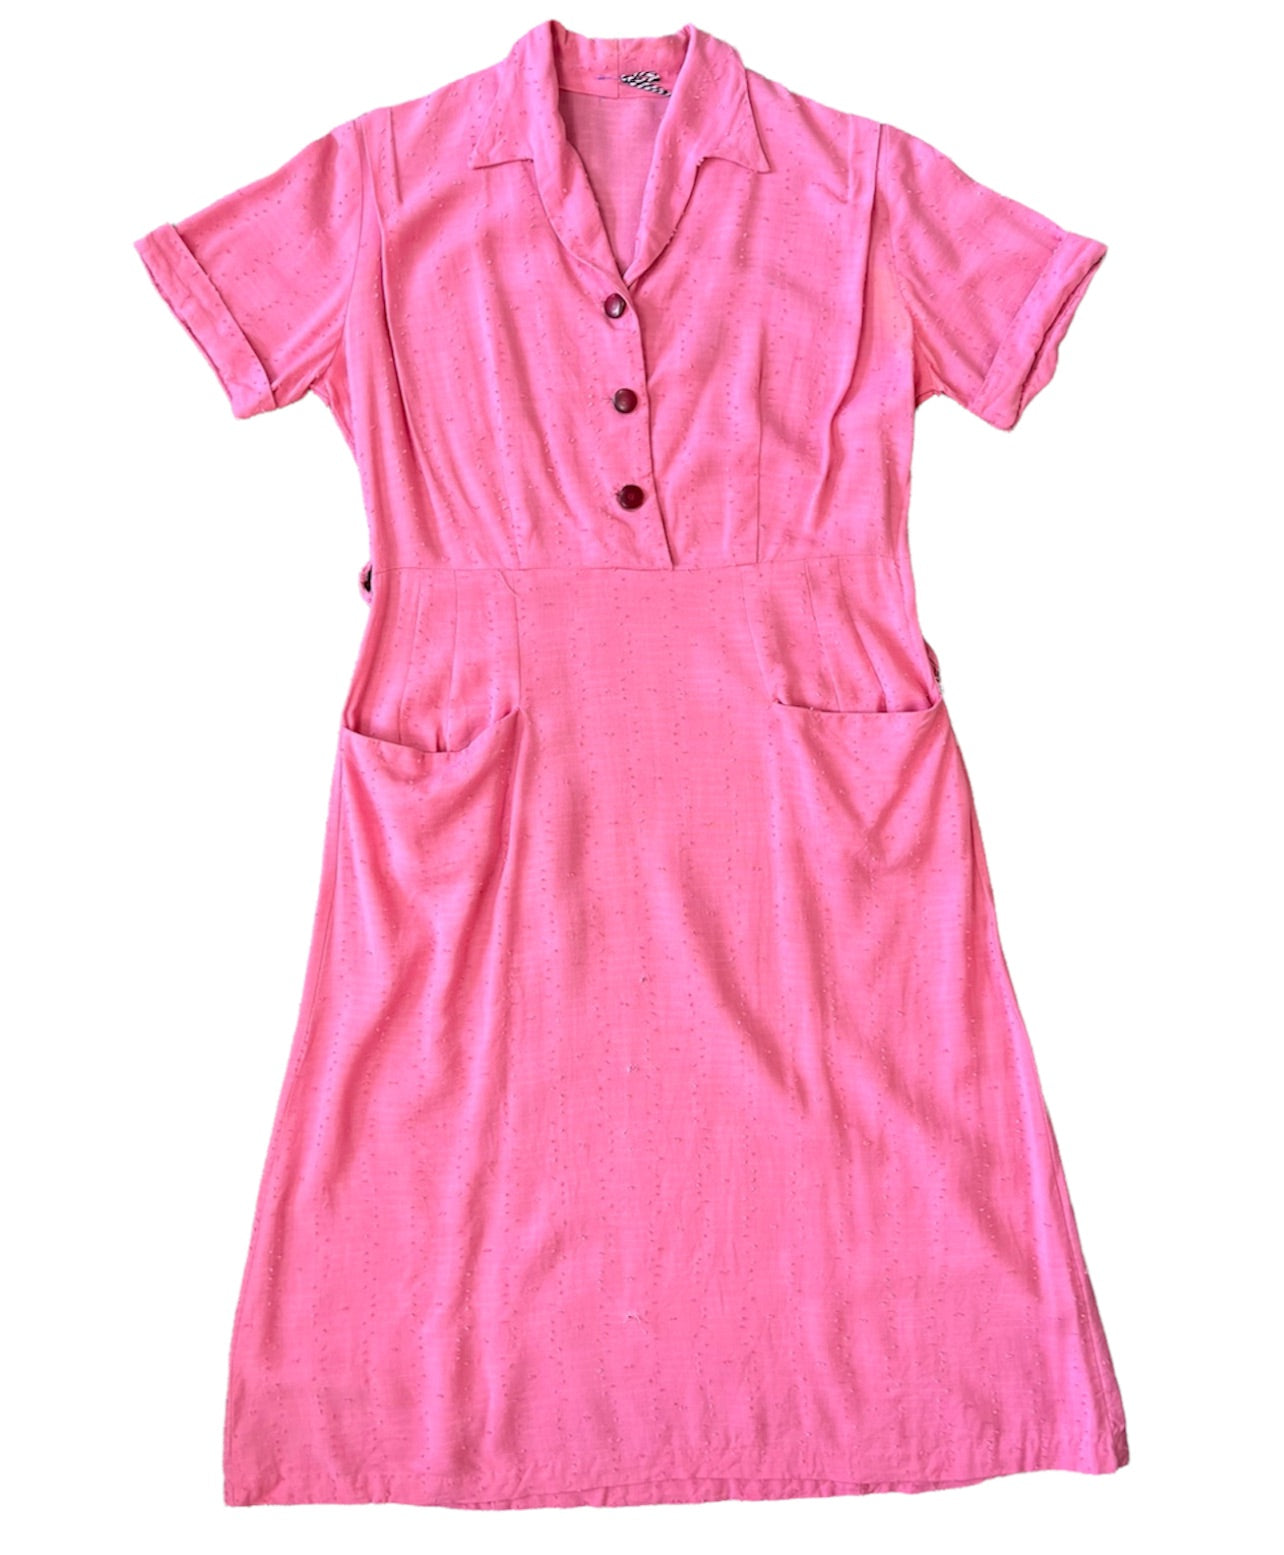 1940s Cotton Pink Day Dress